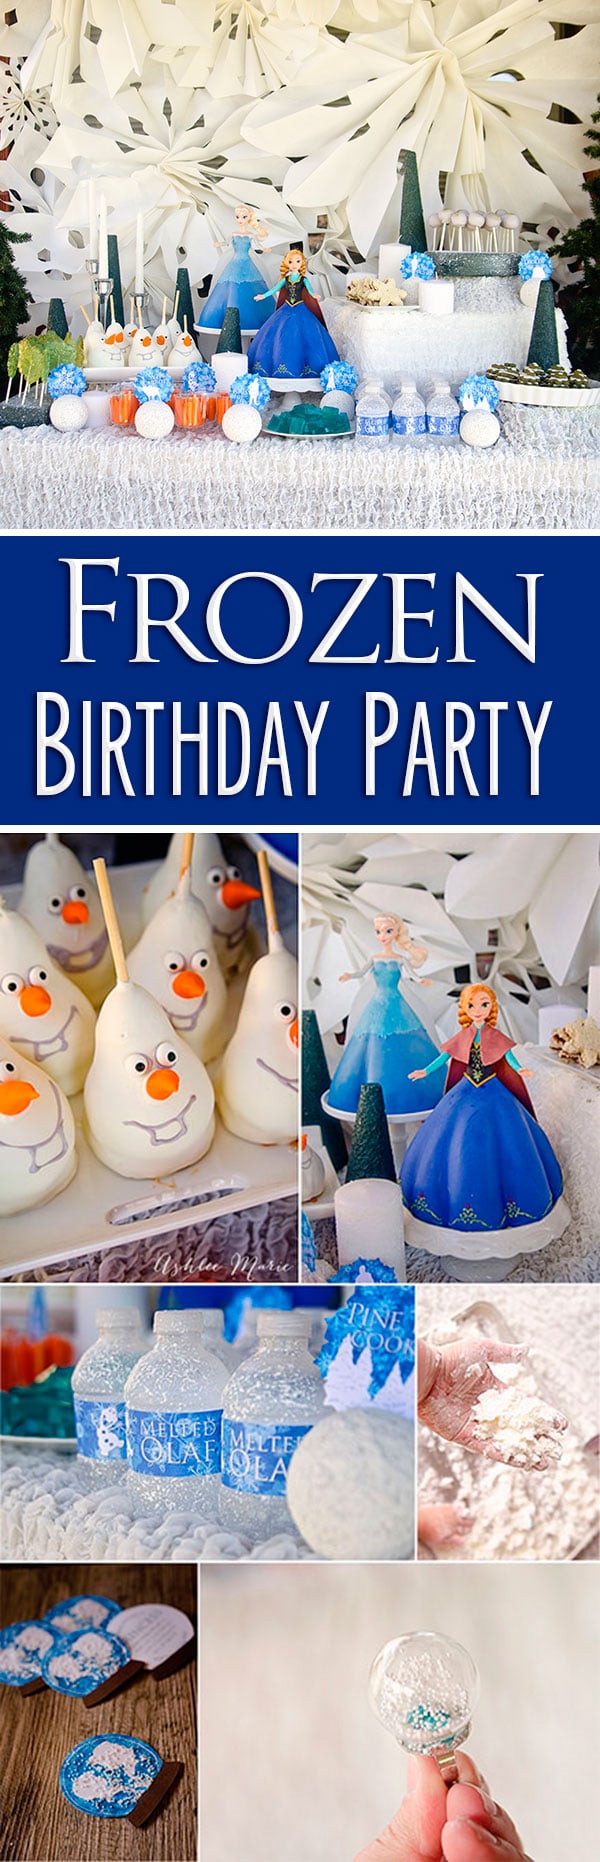 Frozen is the birthday party of the year and this full party is no exception.  Tons of themed movie party food, cake tutorials, decorations and crafts! show your disneyside with a Frozen party